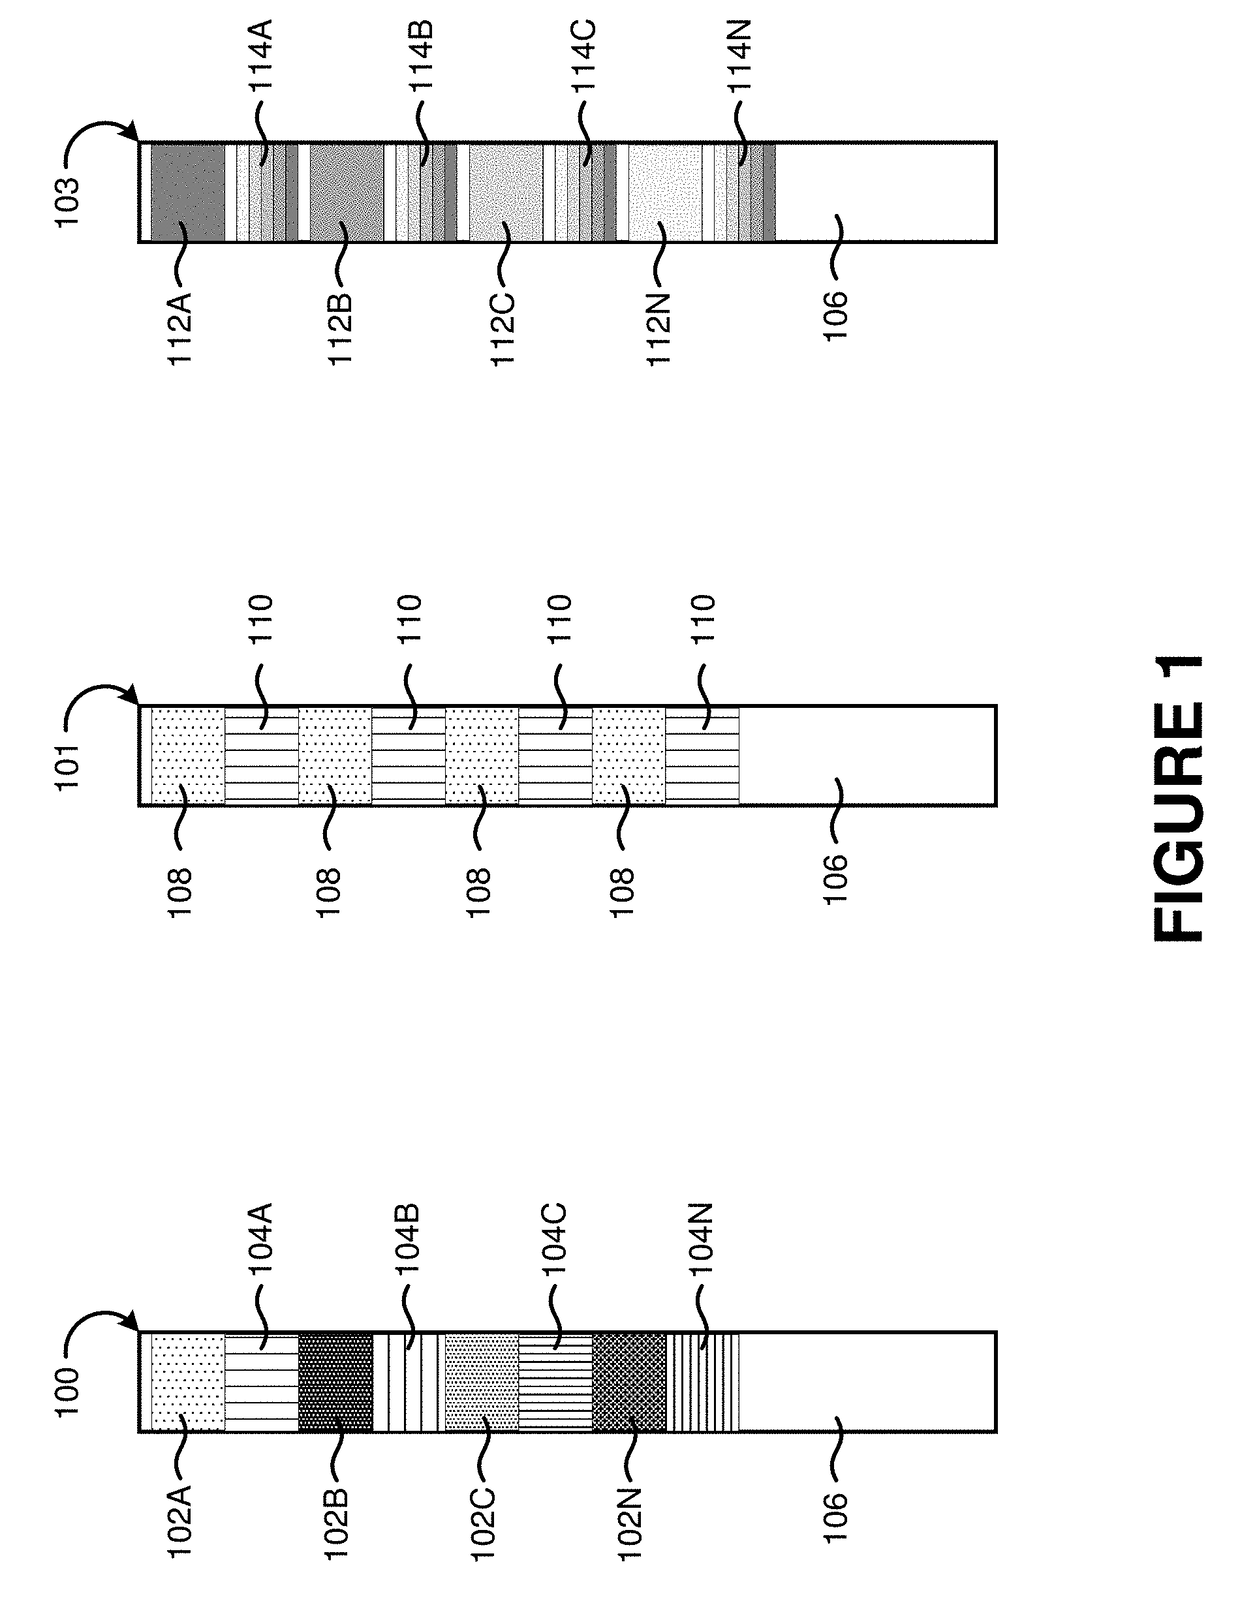 Reagent test strips comprising reference regions for measurement with colorimetric test platform